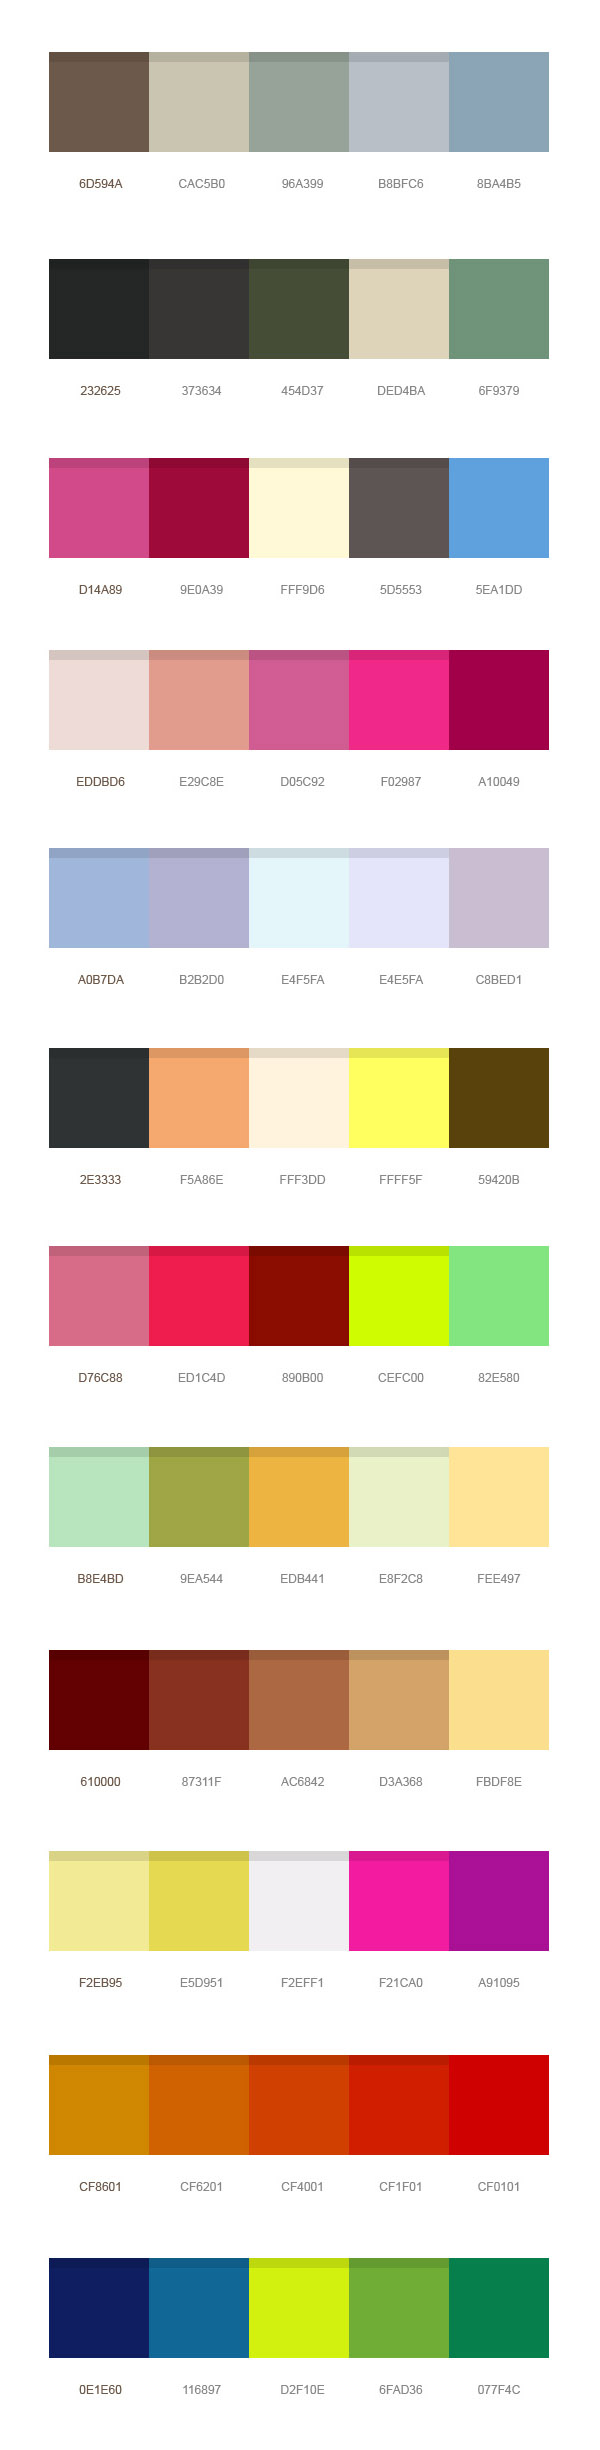 12 beautiful color palettes (PSD) - GraphicsFuel